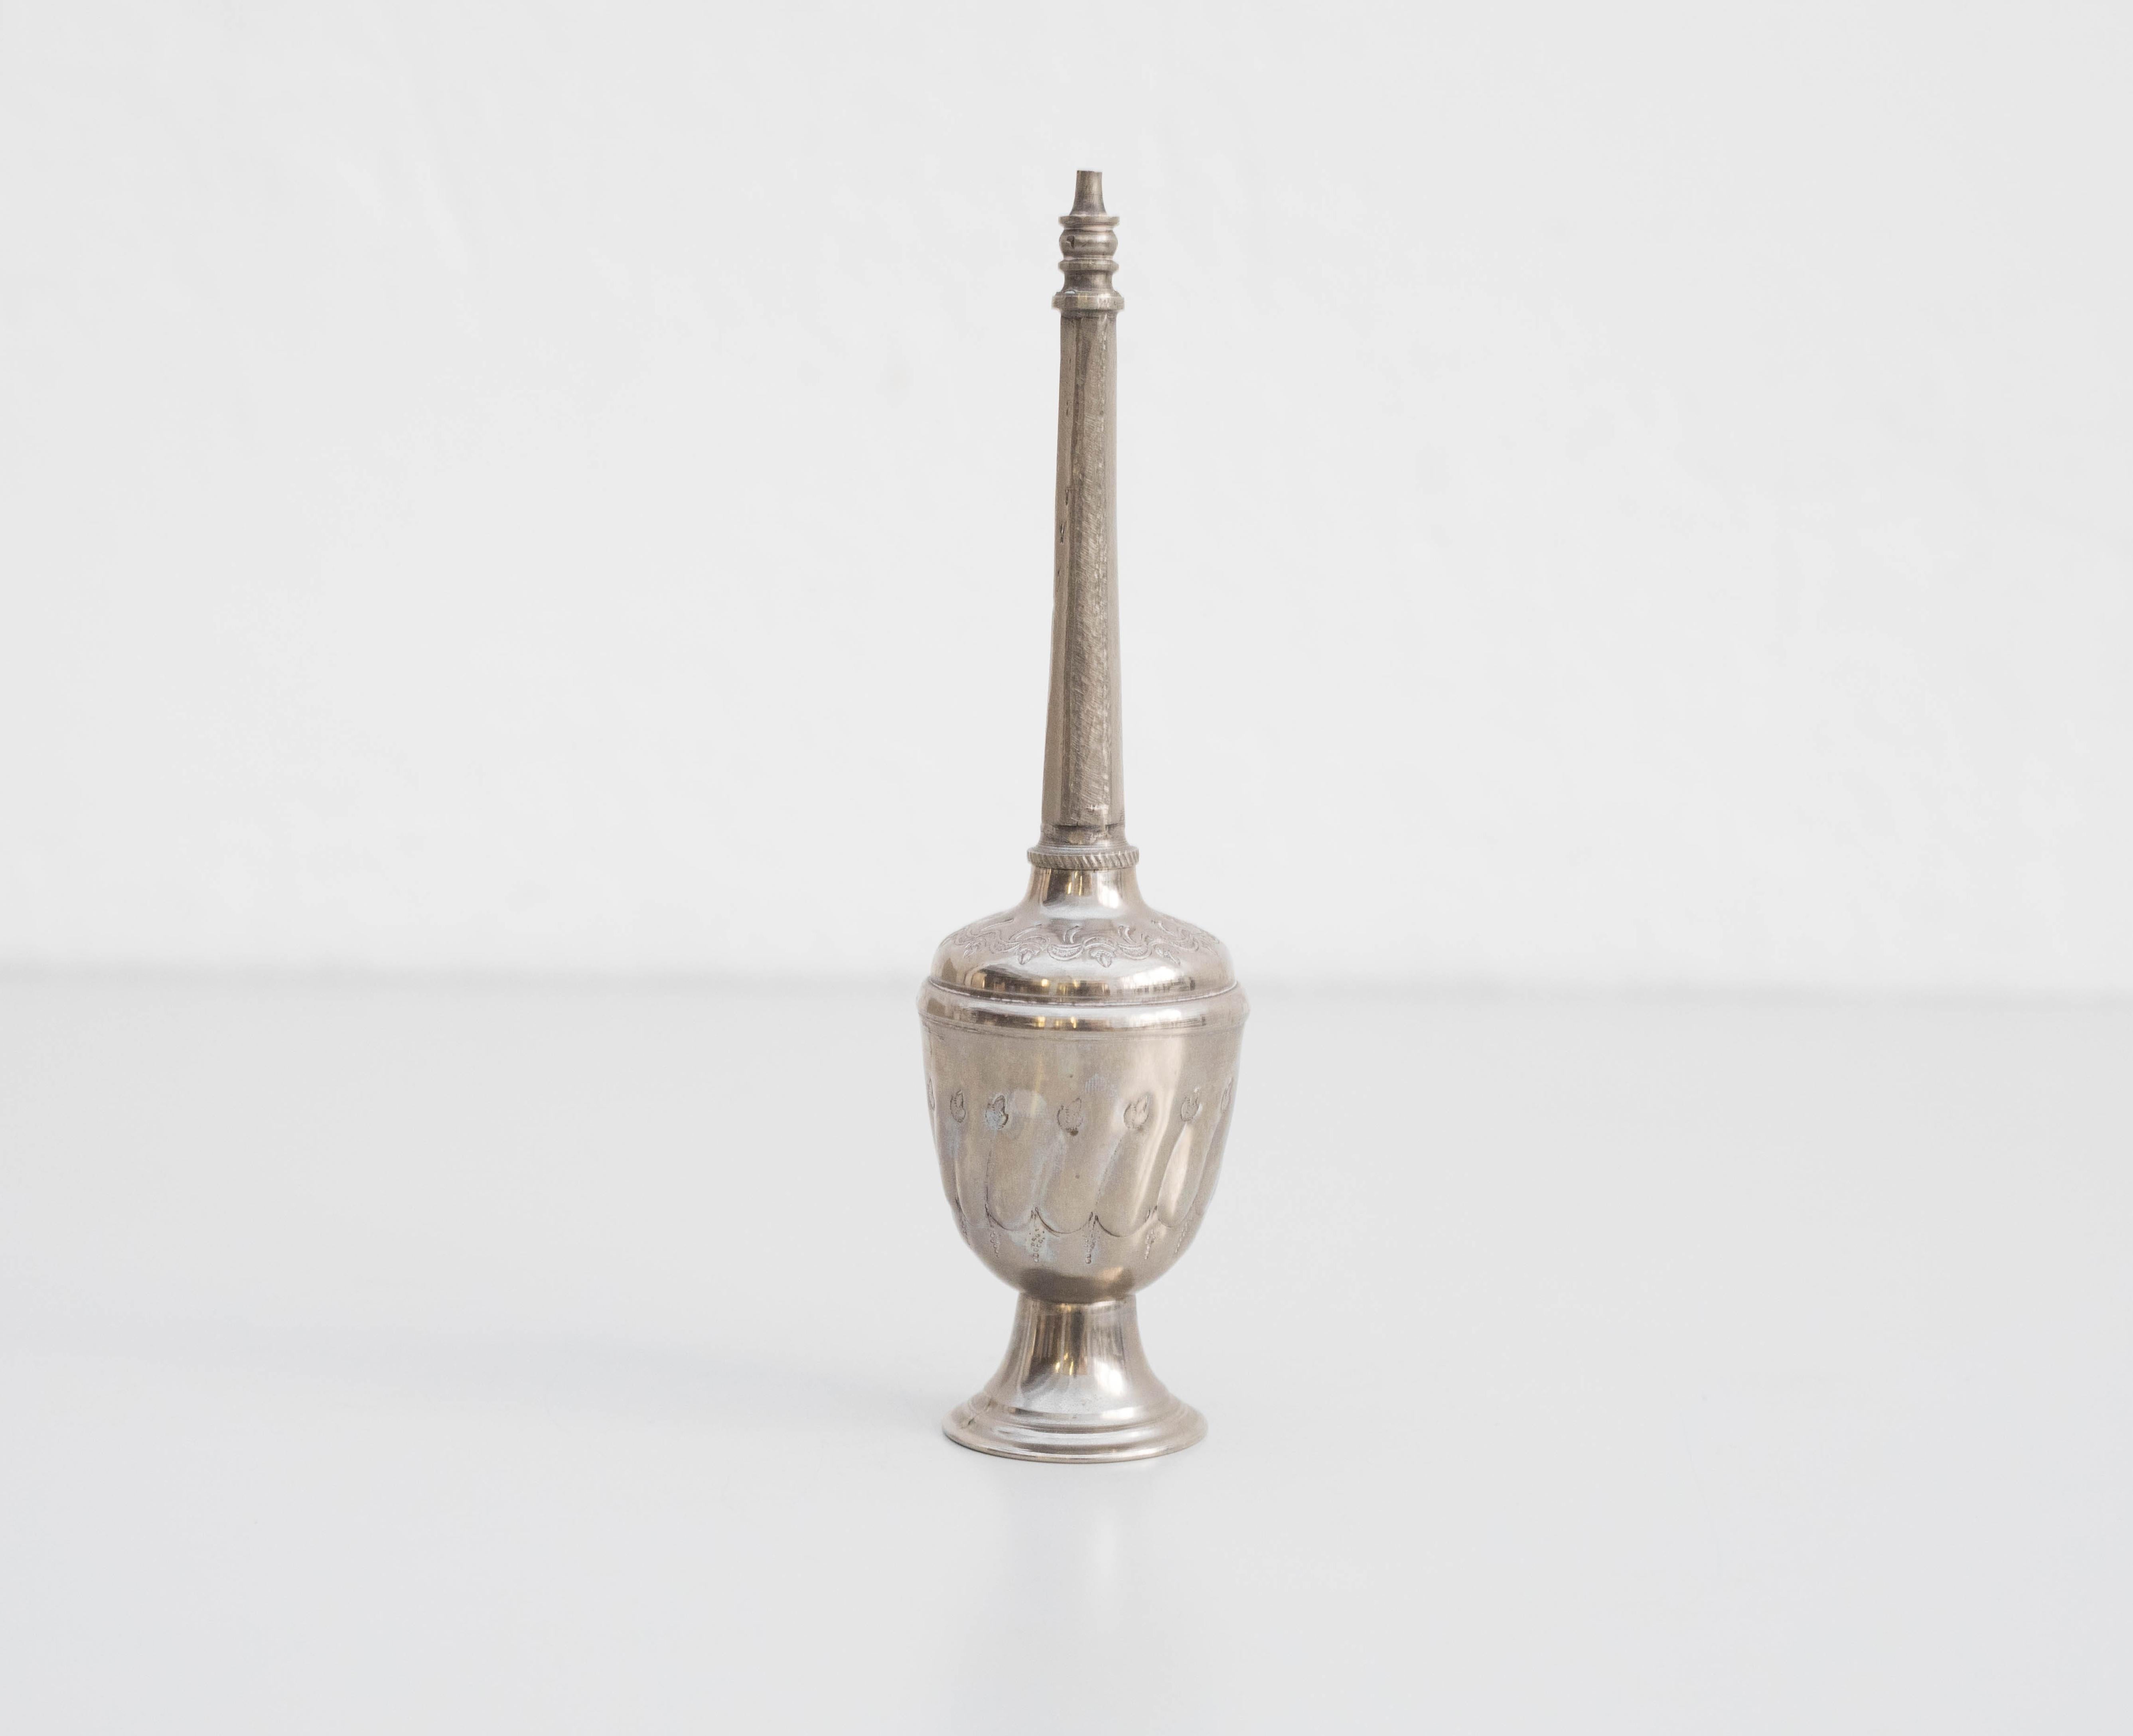 Early 20th century Perfume Bottle.
Manufactured in Arabia.
In original condition, with minor wear consistent with age and use, preserving a beautiful patina.
Material and color:
metal
Dimensions
D6 cm x H 21.5 cm.